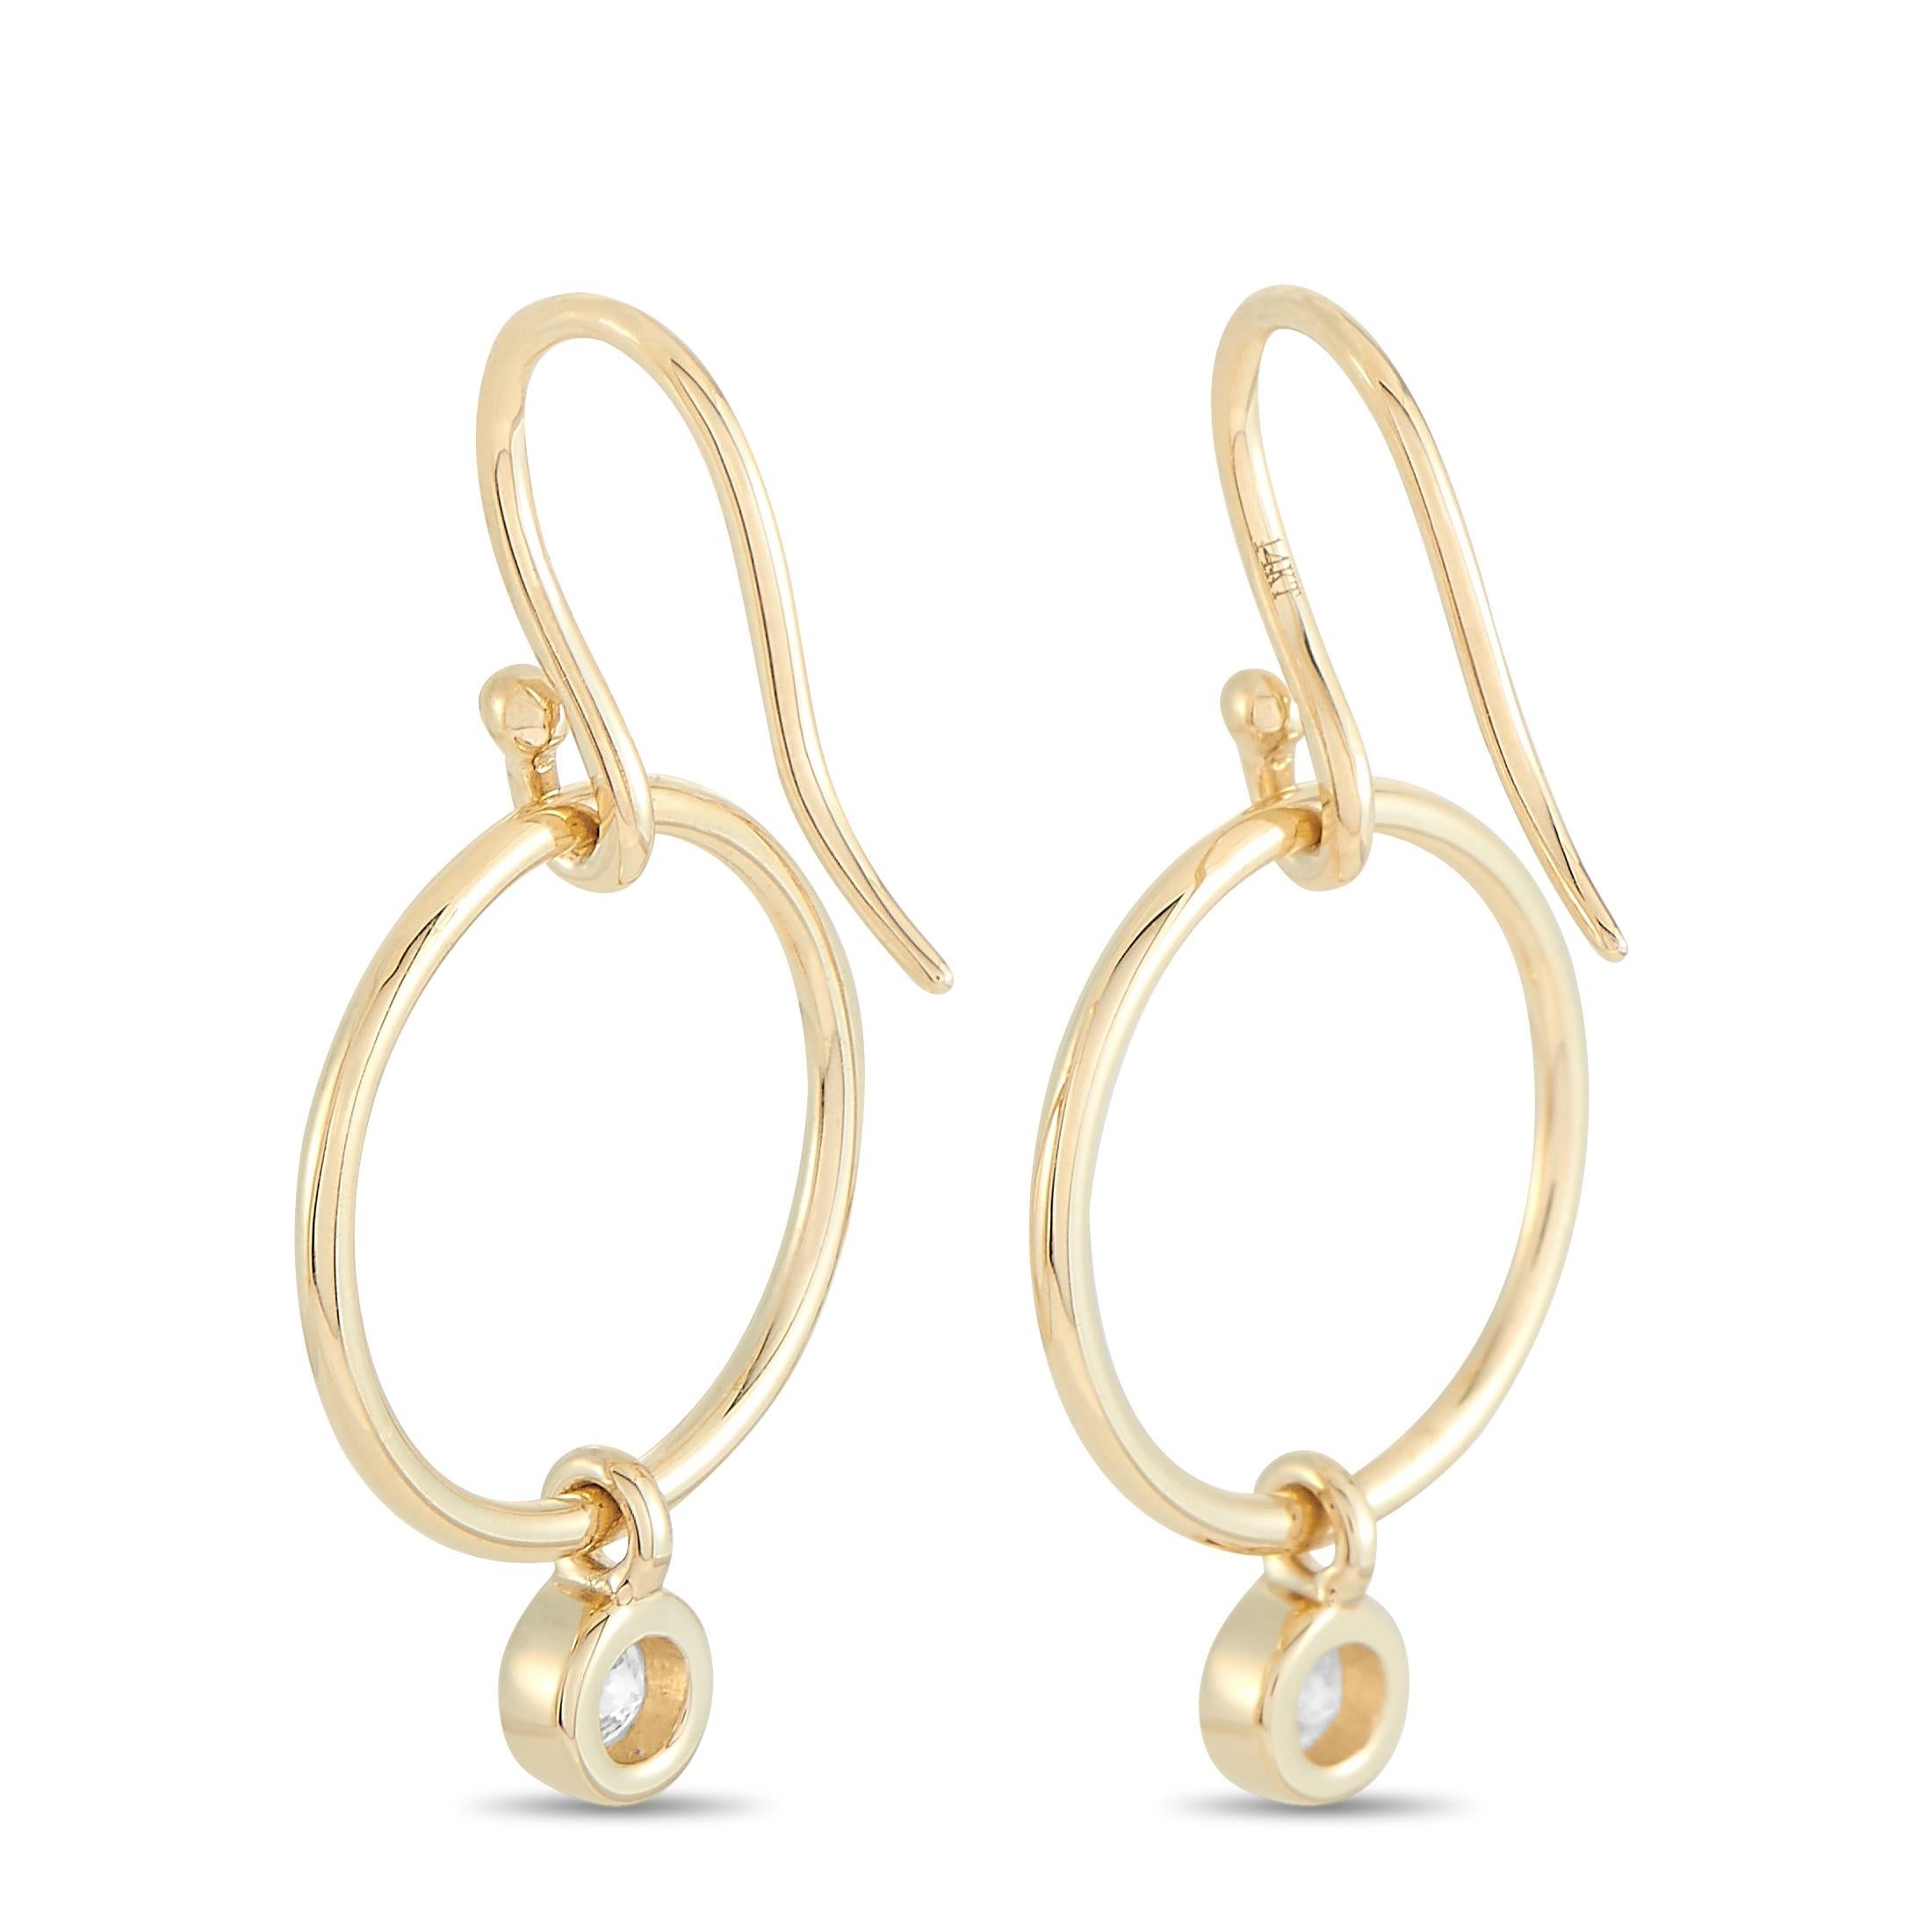 These LB Exclusive earrings are made of 14K yellow gold and embellished with diamonds that total 0.32 carats. The earrings measure 1.25” in length and 0.65” in width and each of the two weighs 1.4 grams.
 
 The pair is offered in brand new condition